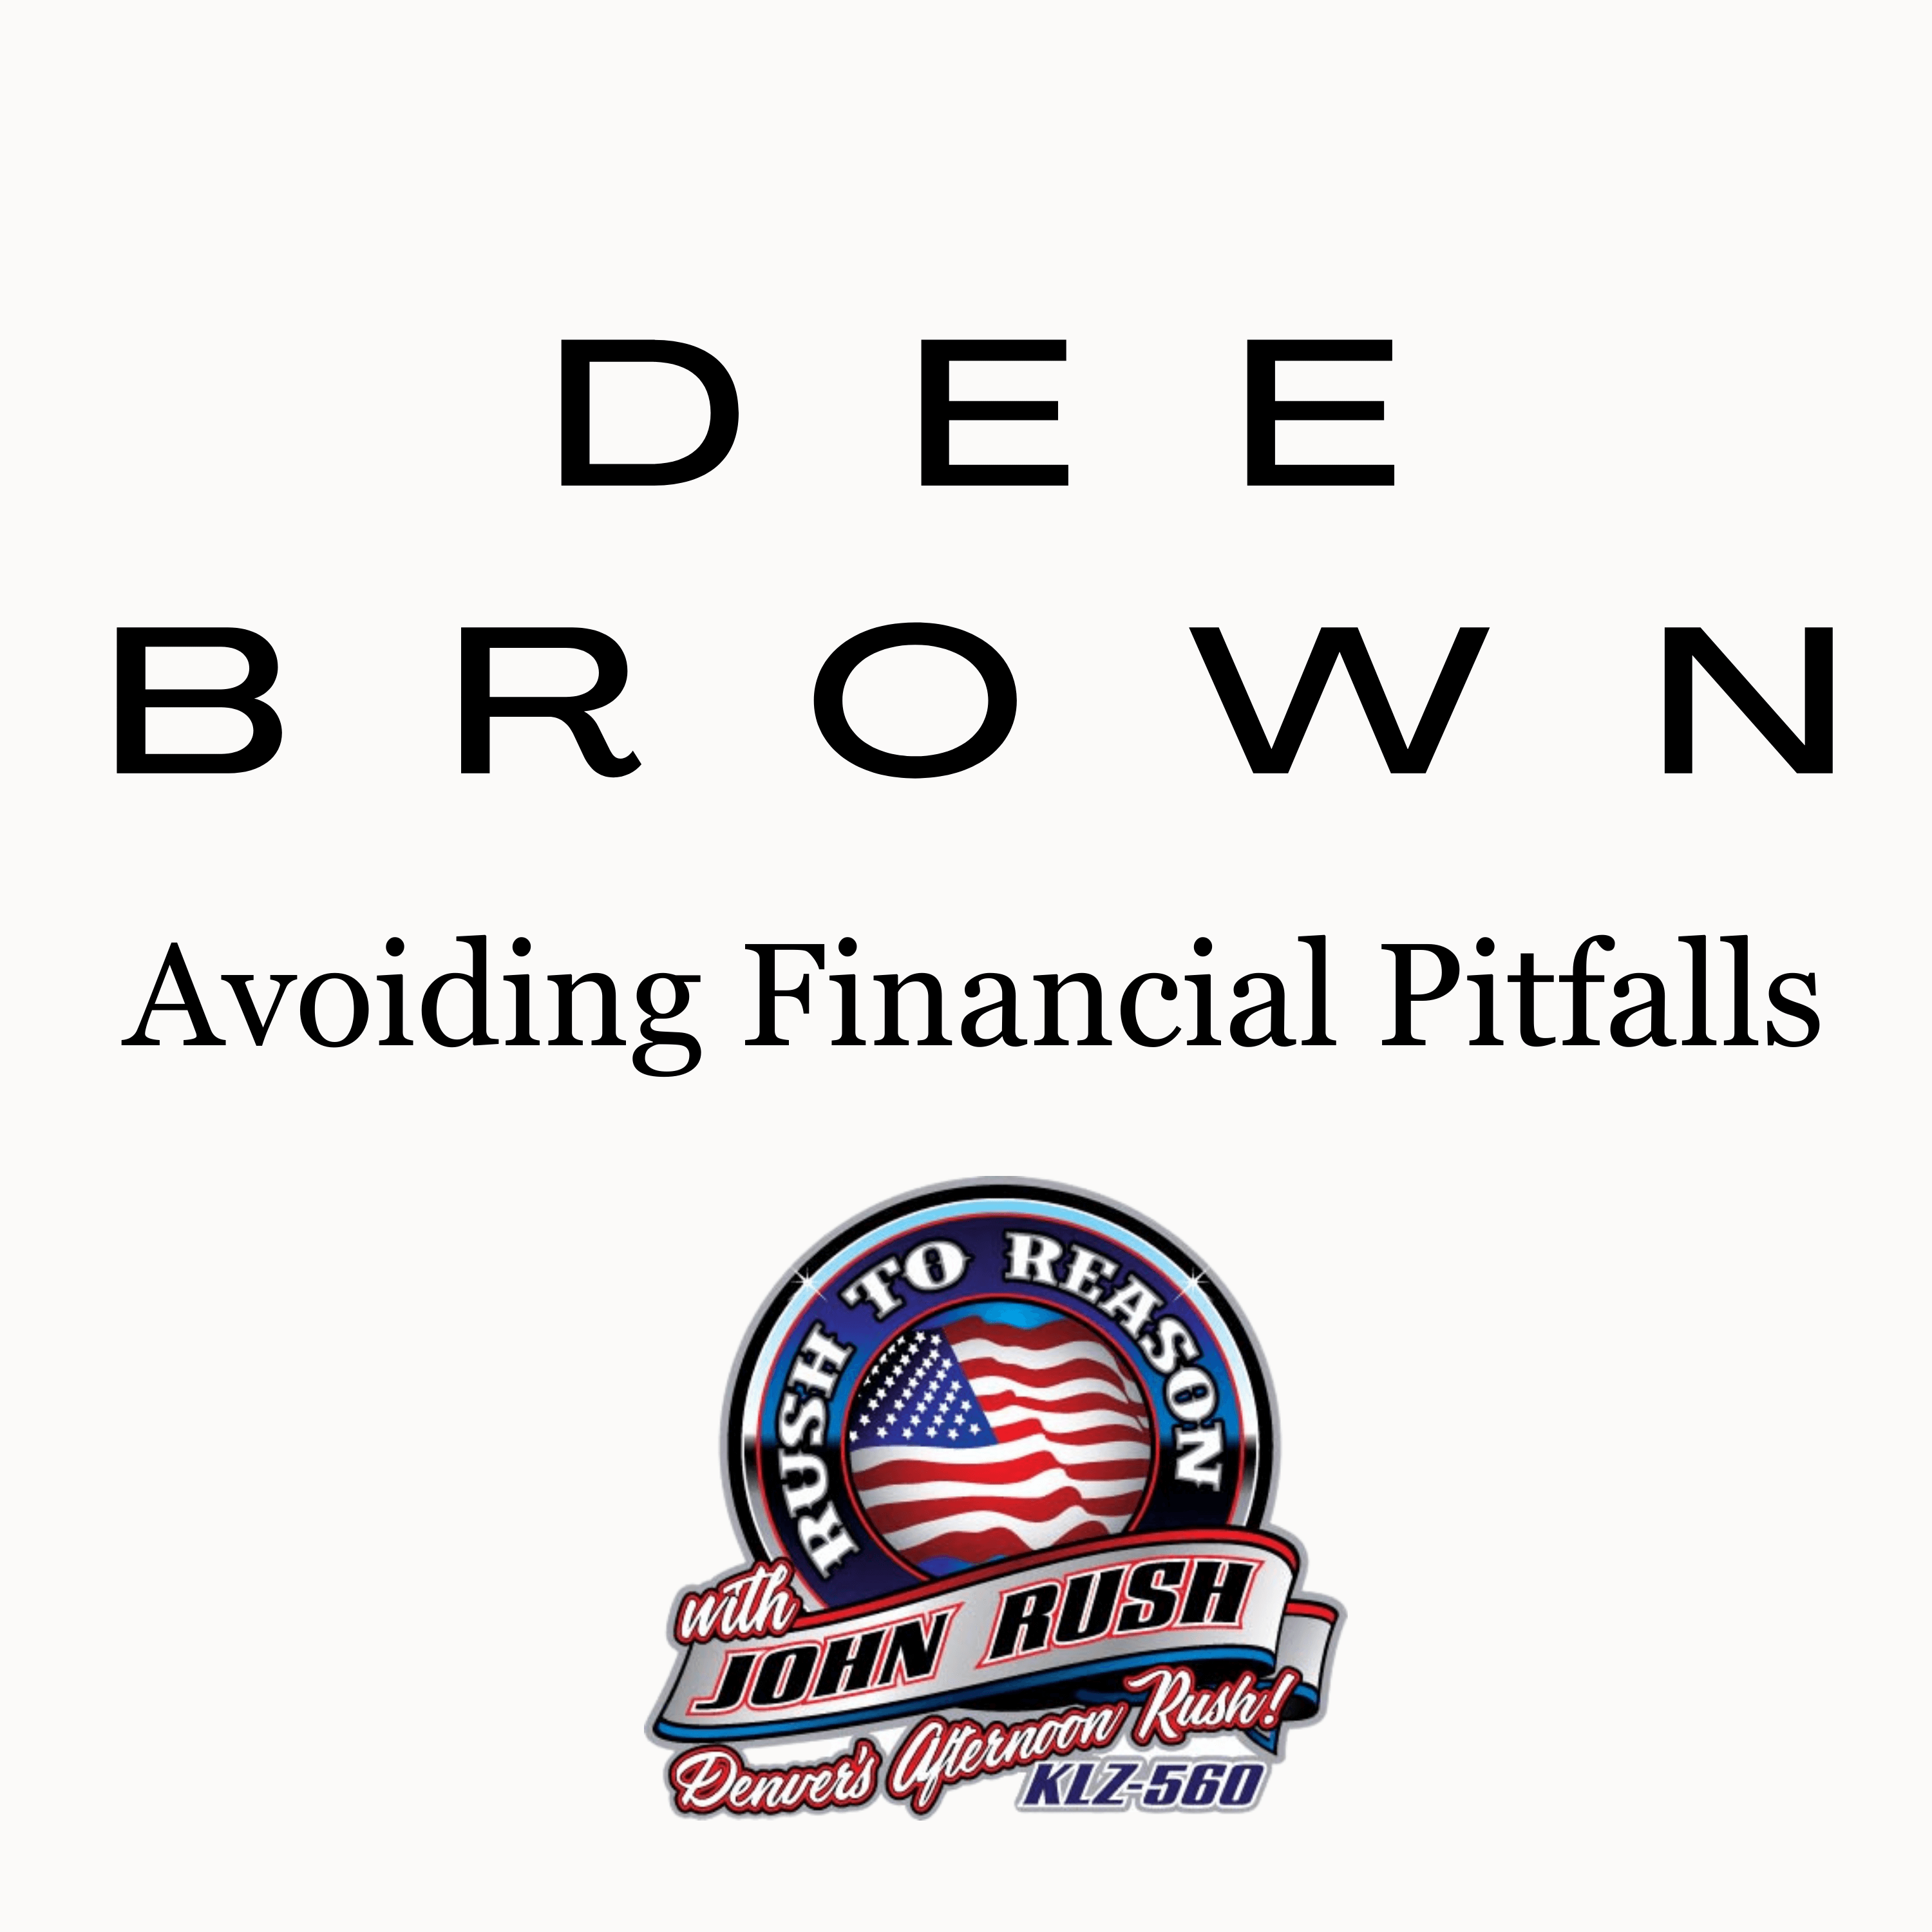 Avoiding Financial Pitfalls with Dee Brown